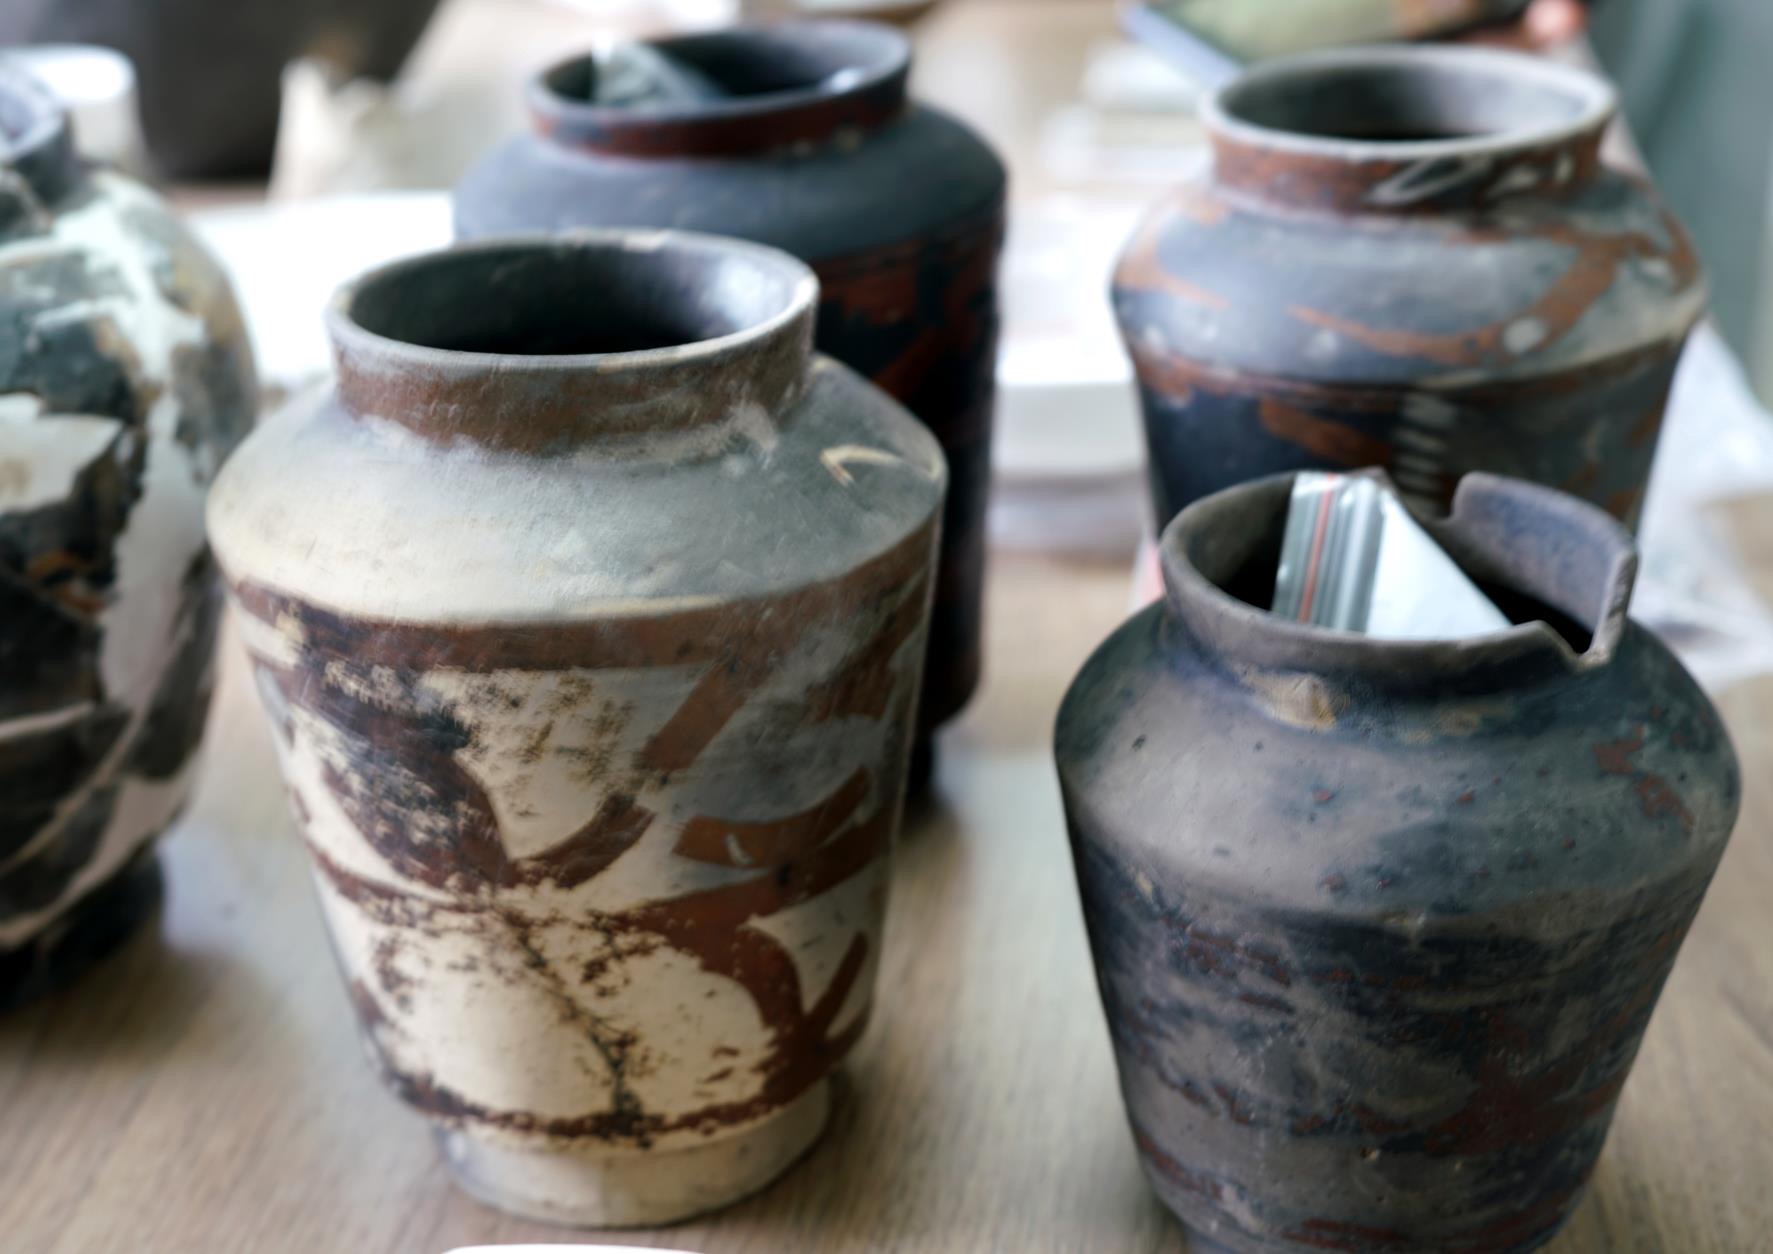 Pottery pots excavated from the ruins site Photo: VCG